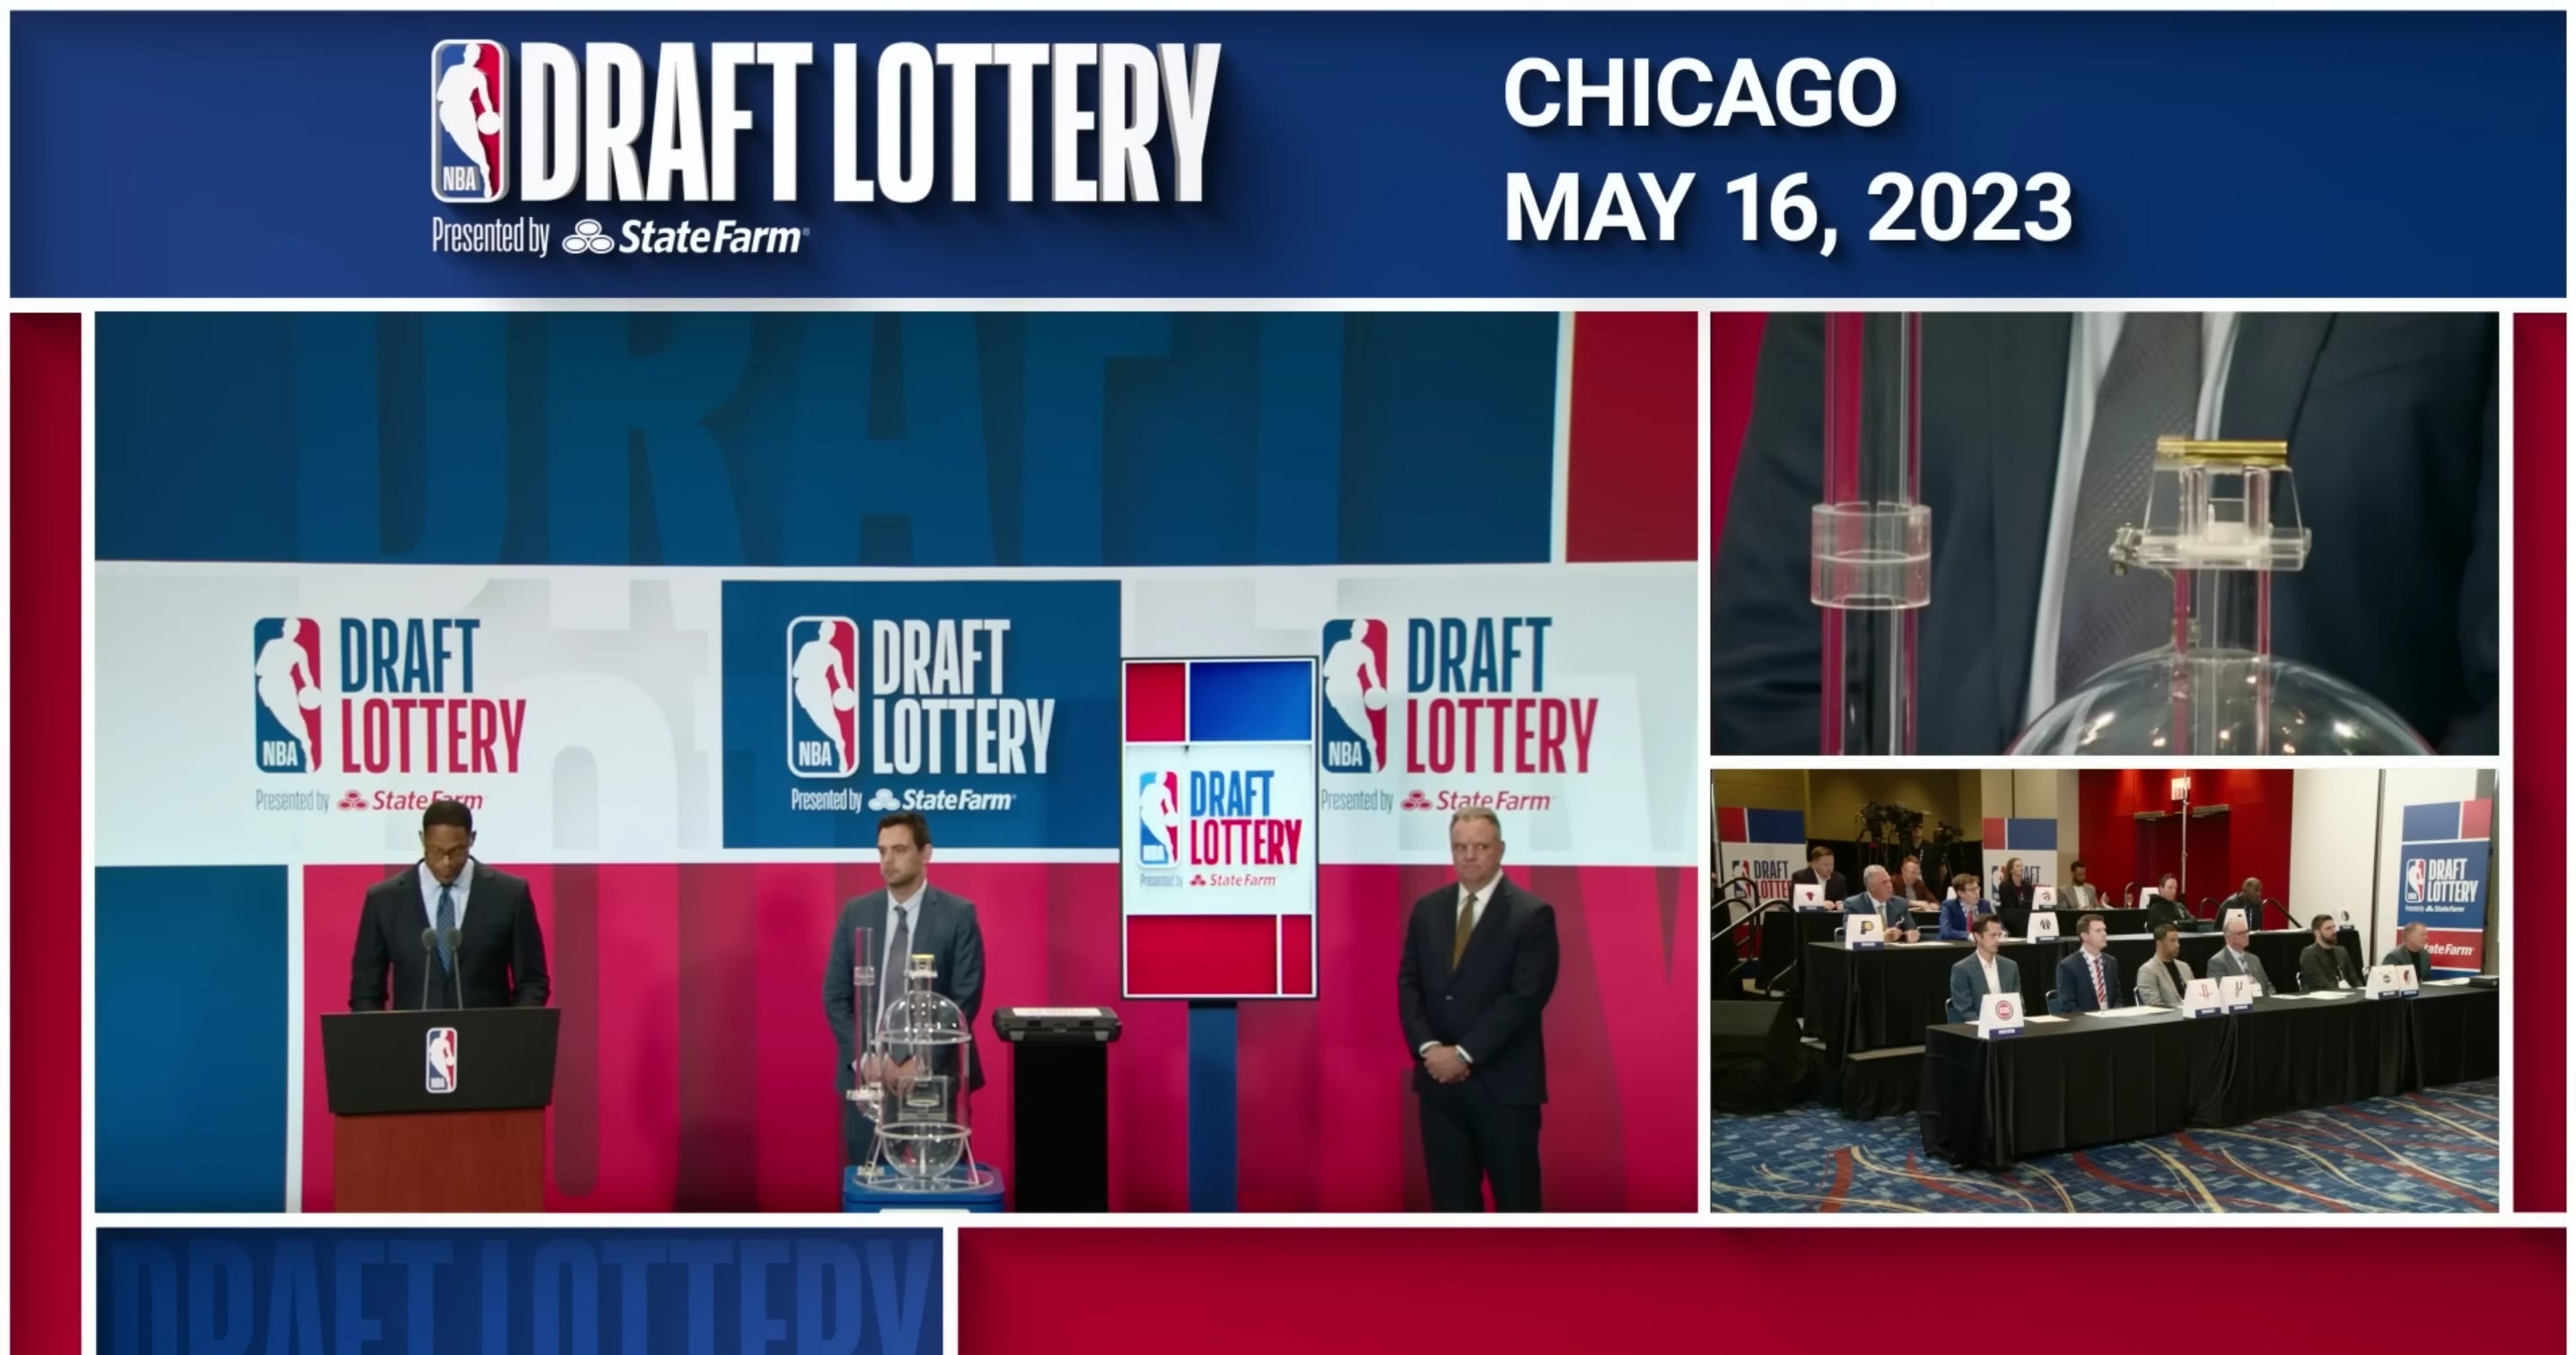 Live updates, NBA Draft starts with the annual fashion